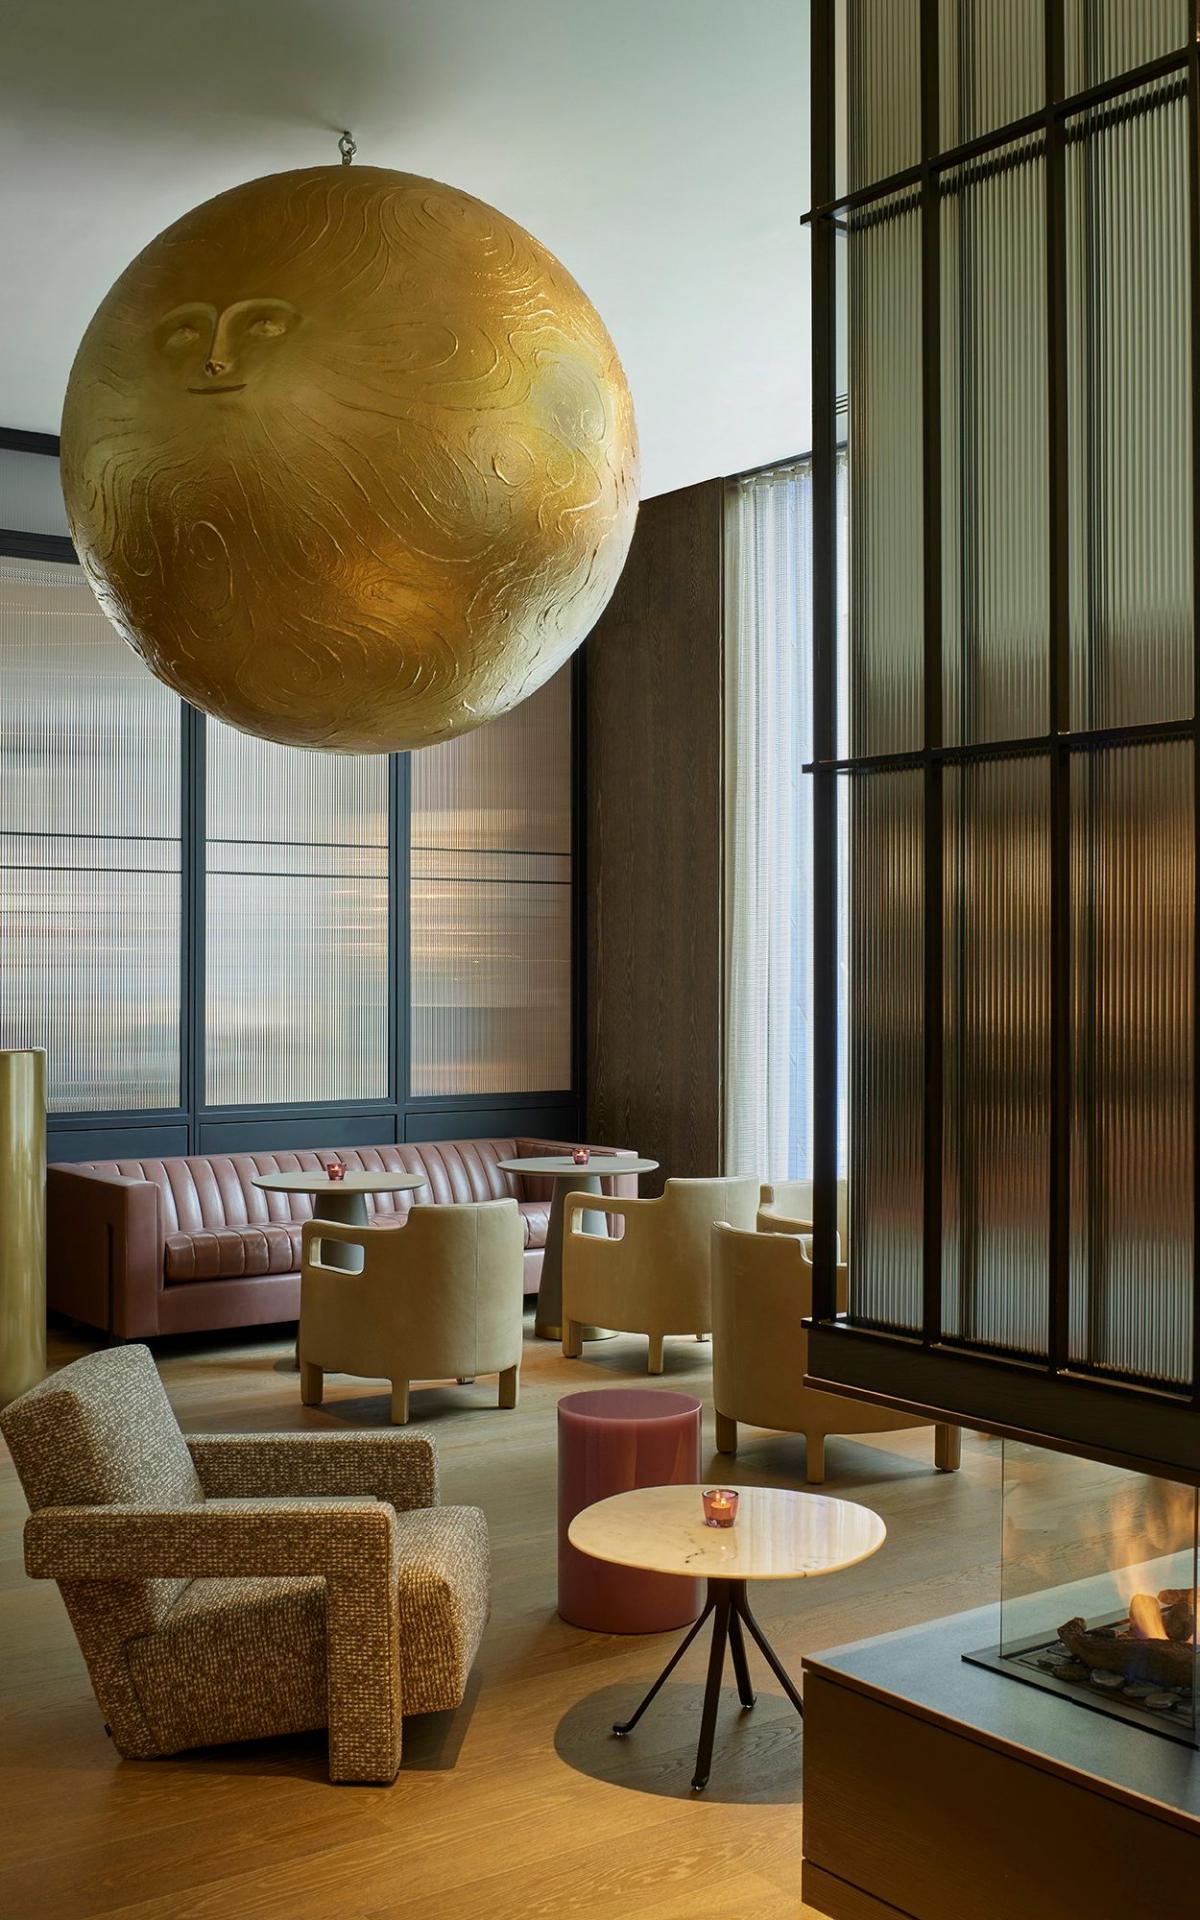 Our Top 10 Hotels by Design: The Londoner